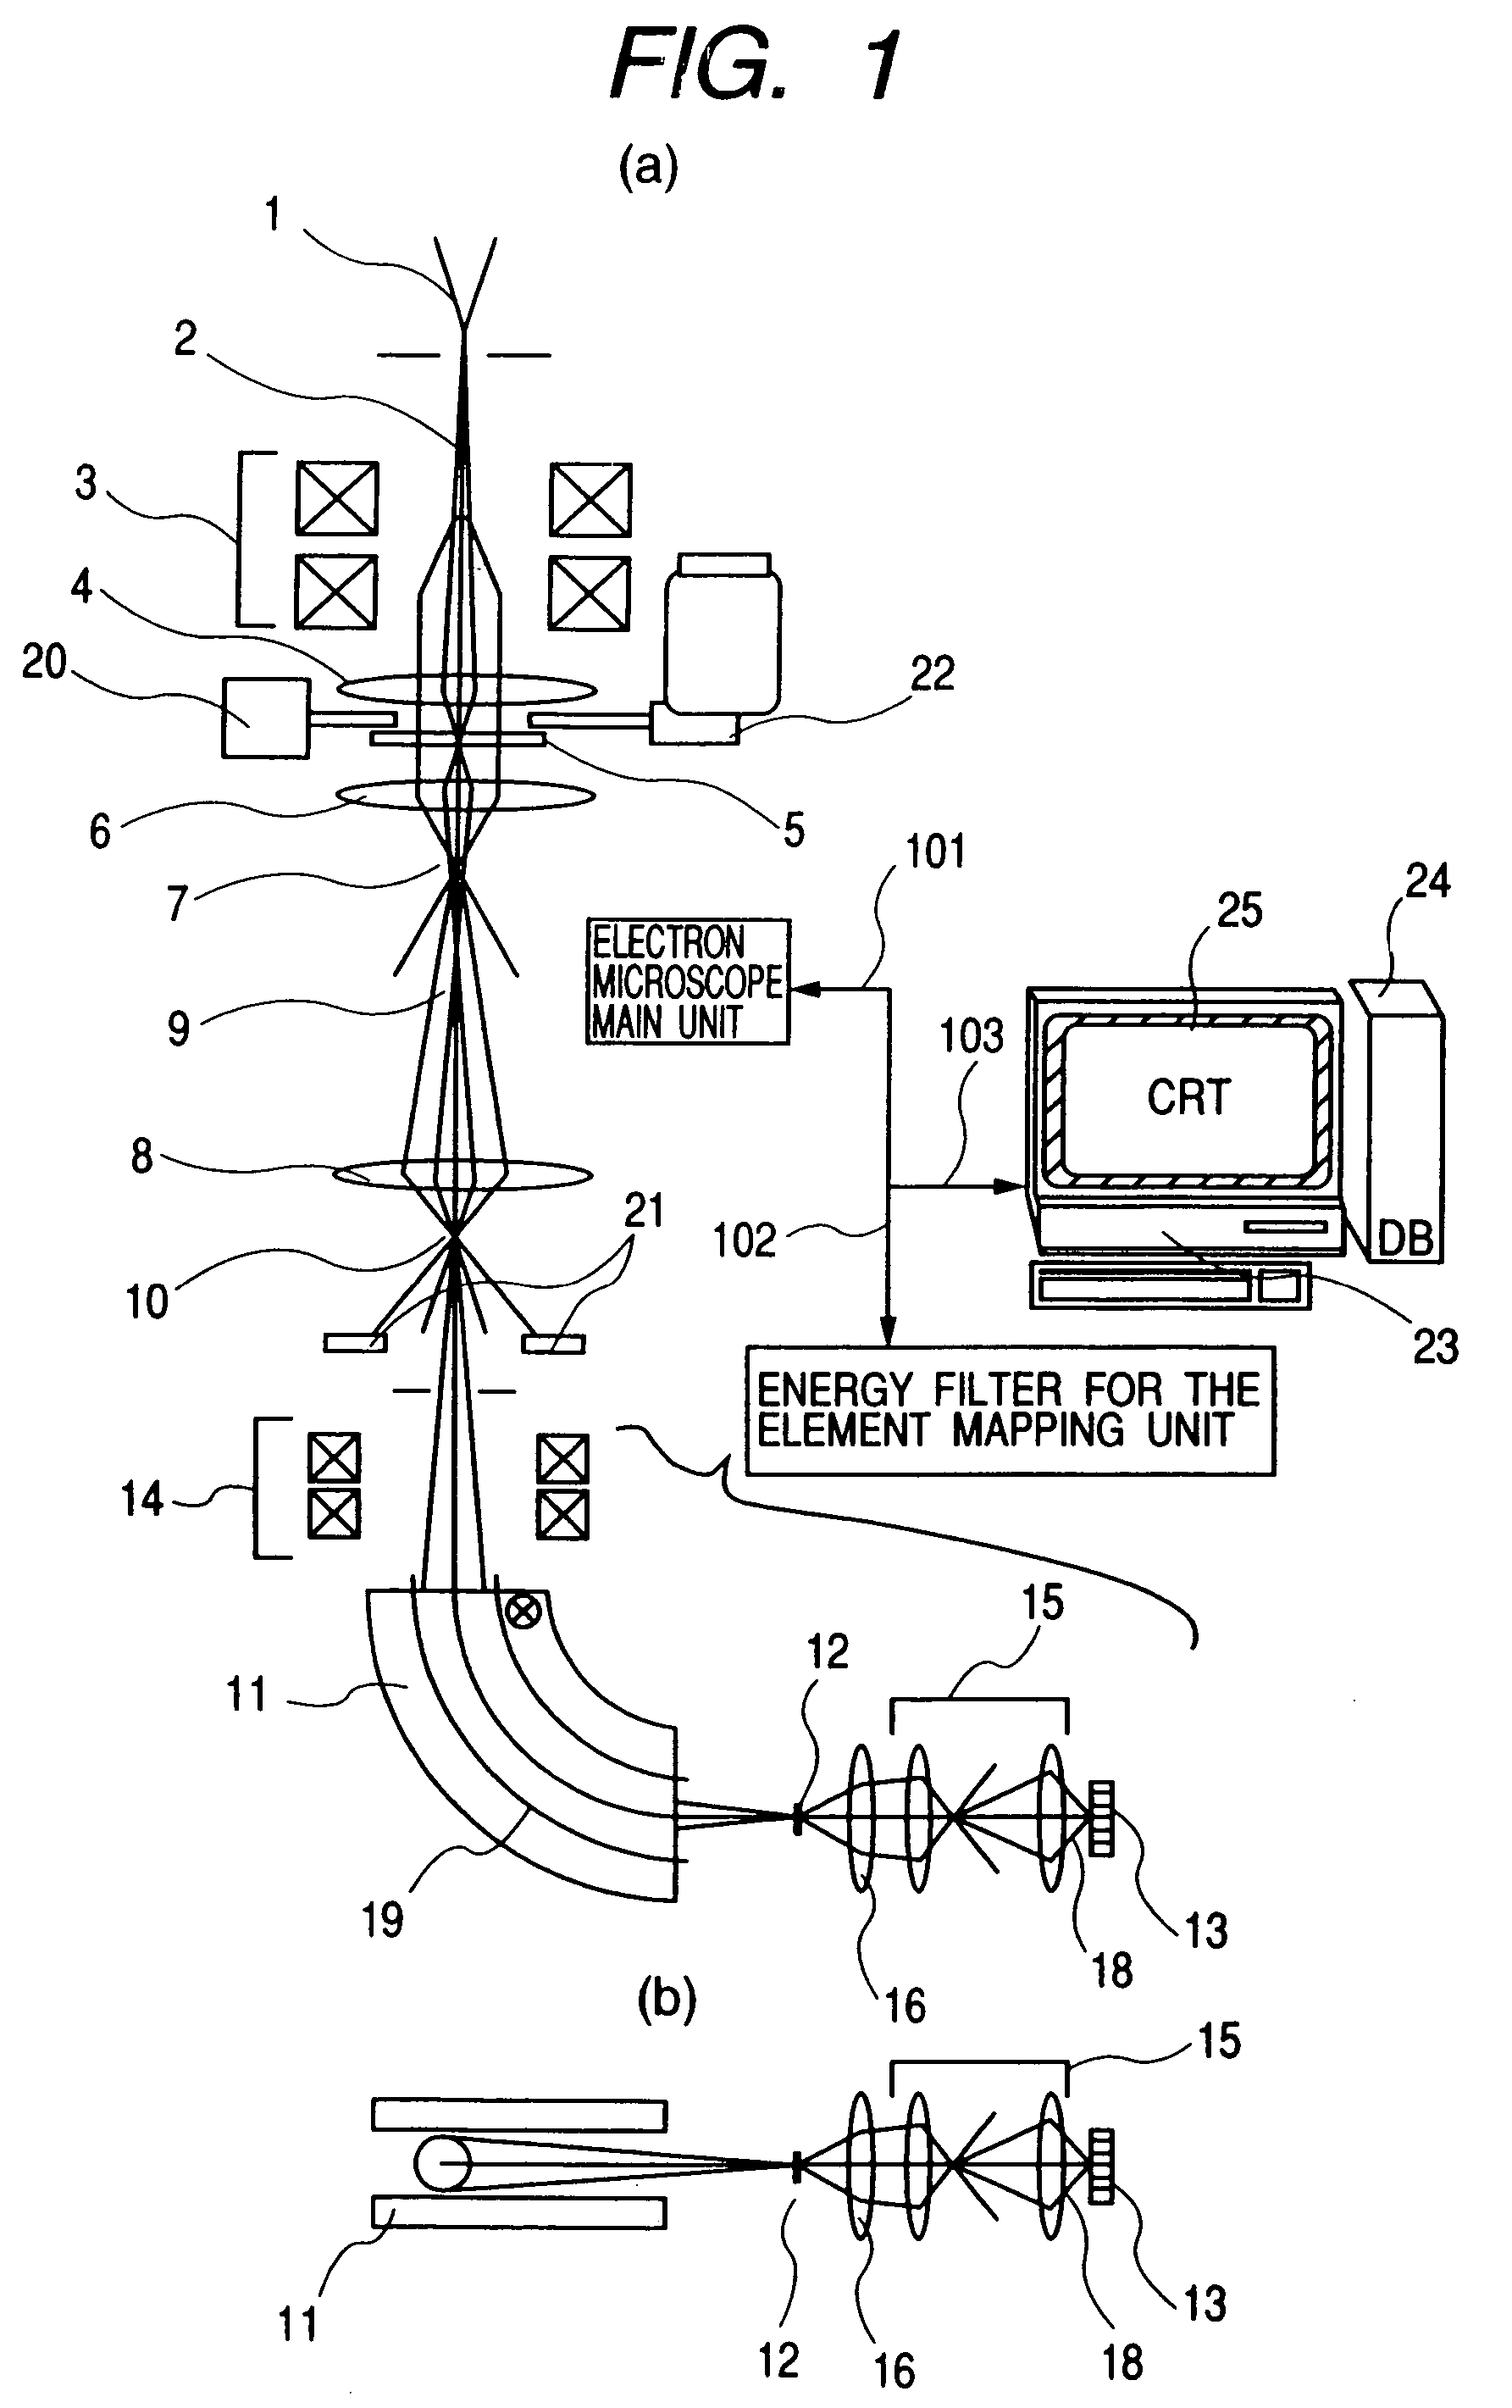 Element mapping unit, scanning transmission electron microscope, and element mapping method